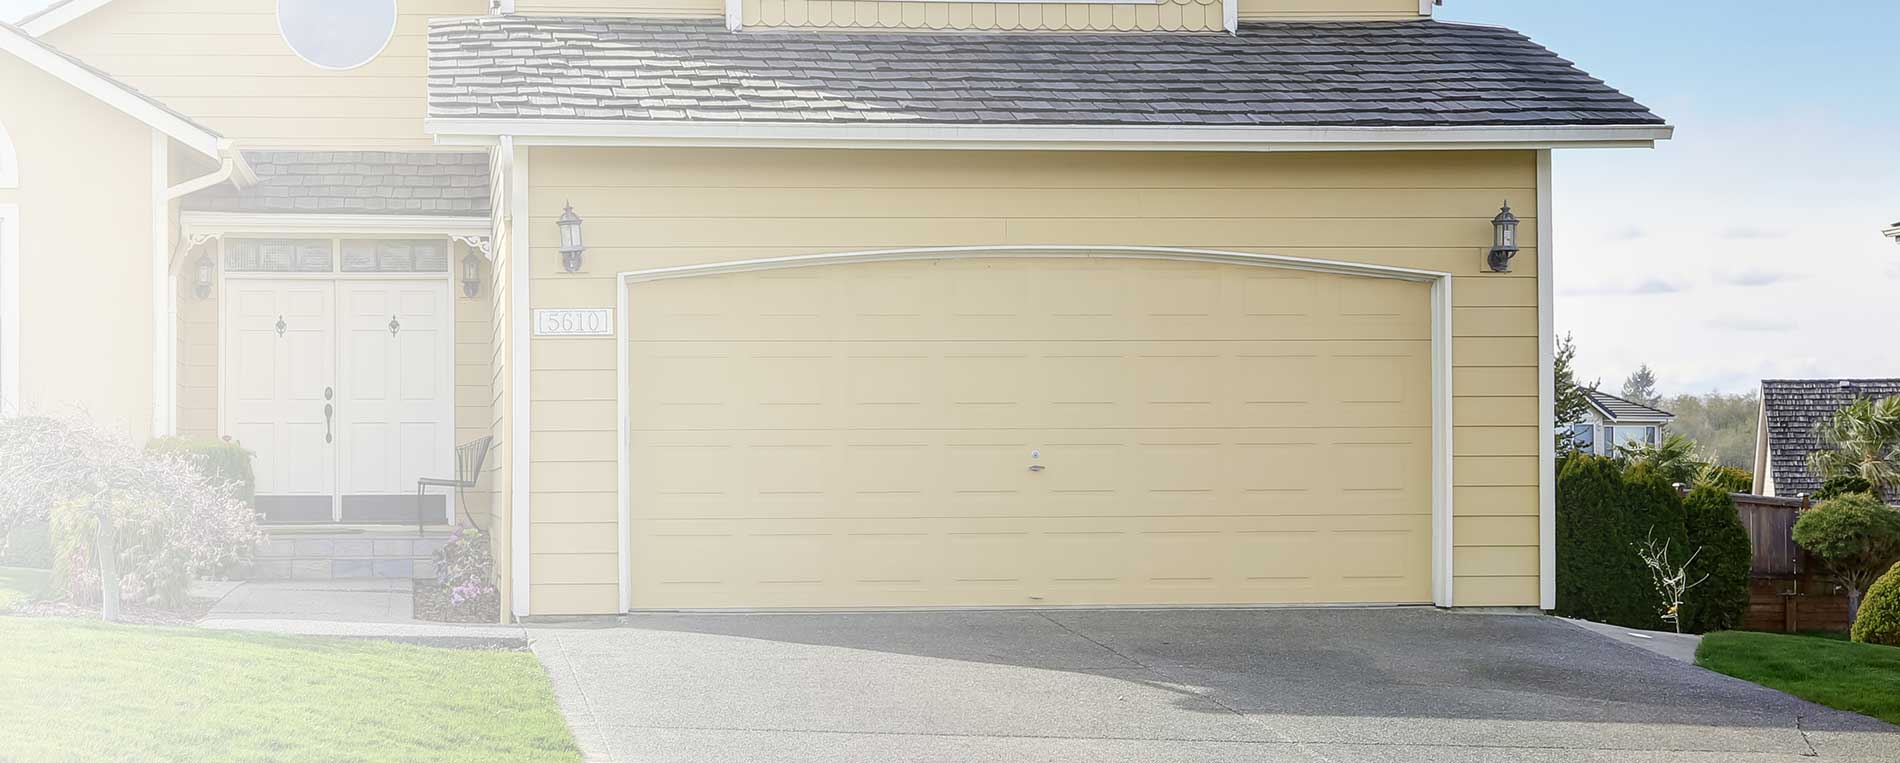 Same-day Garage Door Replacement Near Concord